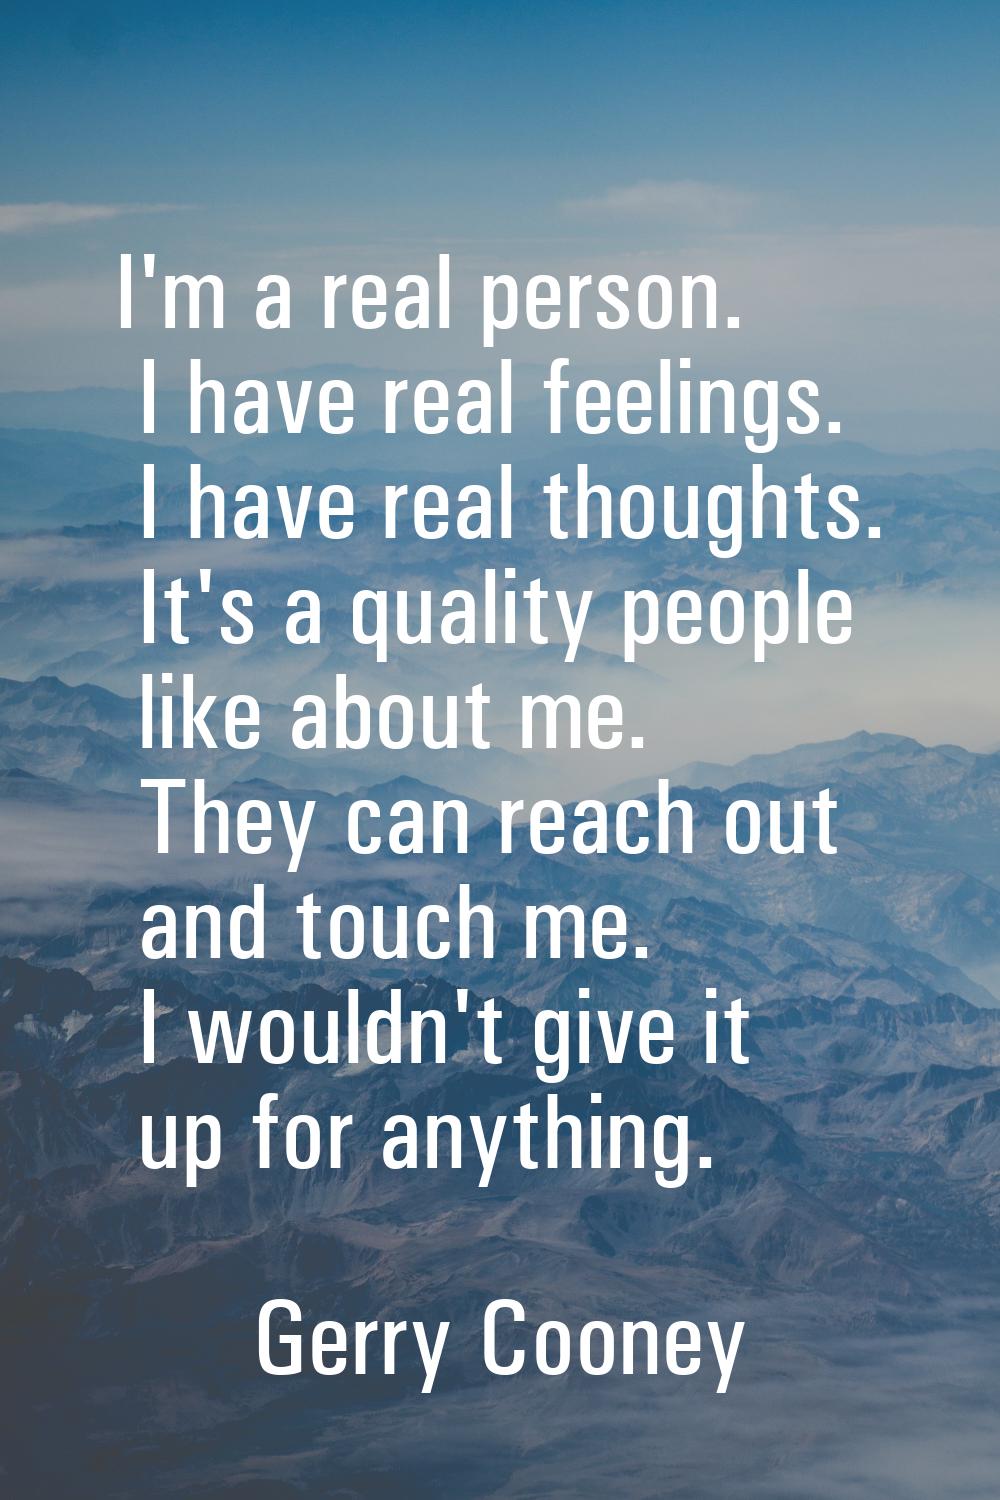 I'm a real person. I have real feelings. I have real thoughts. It's a quality people like about me.